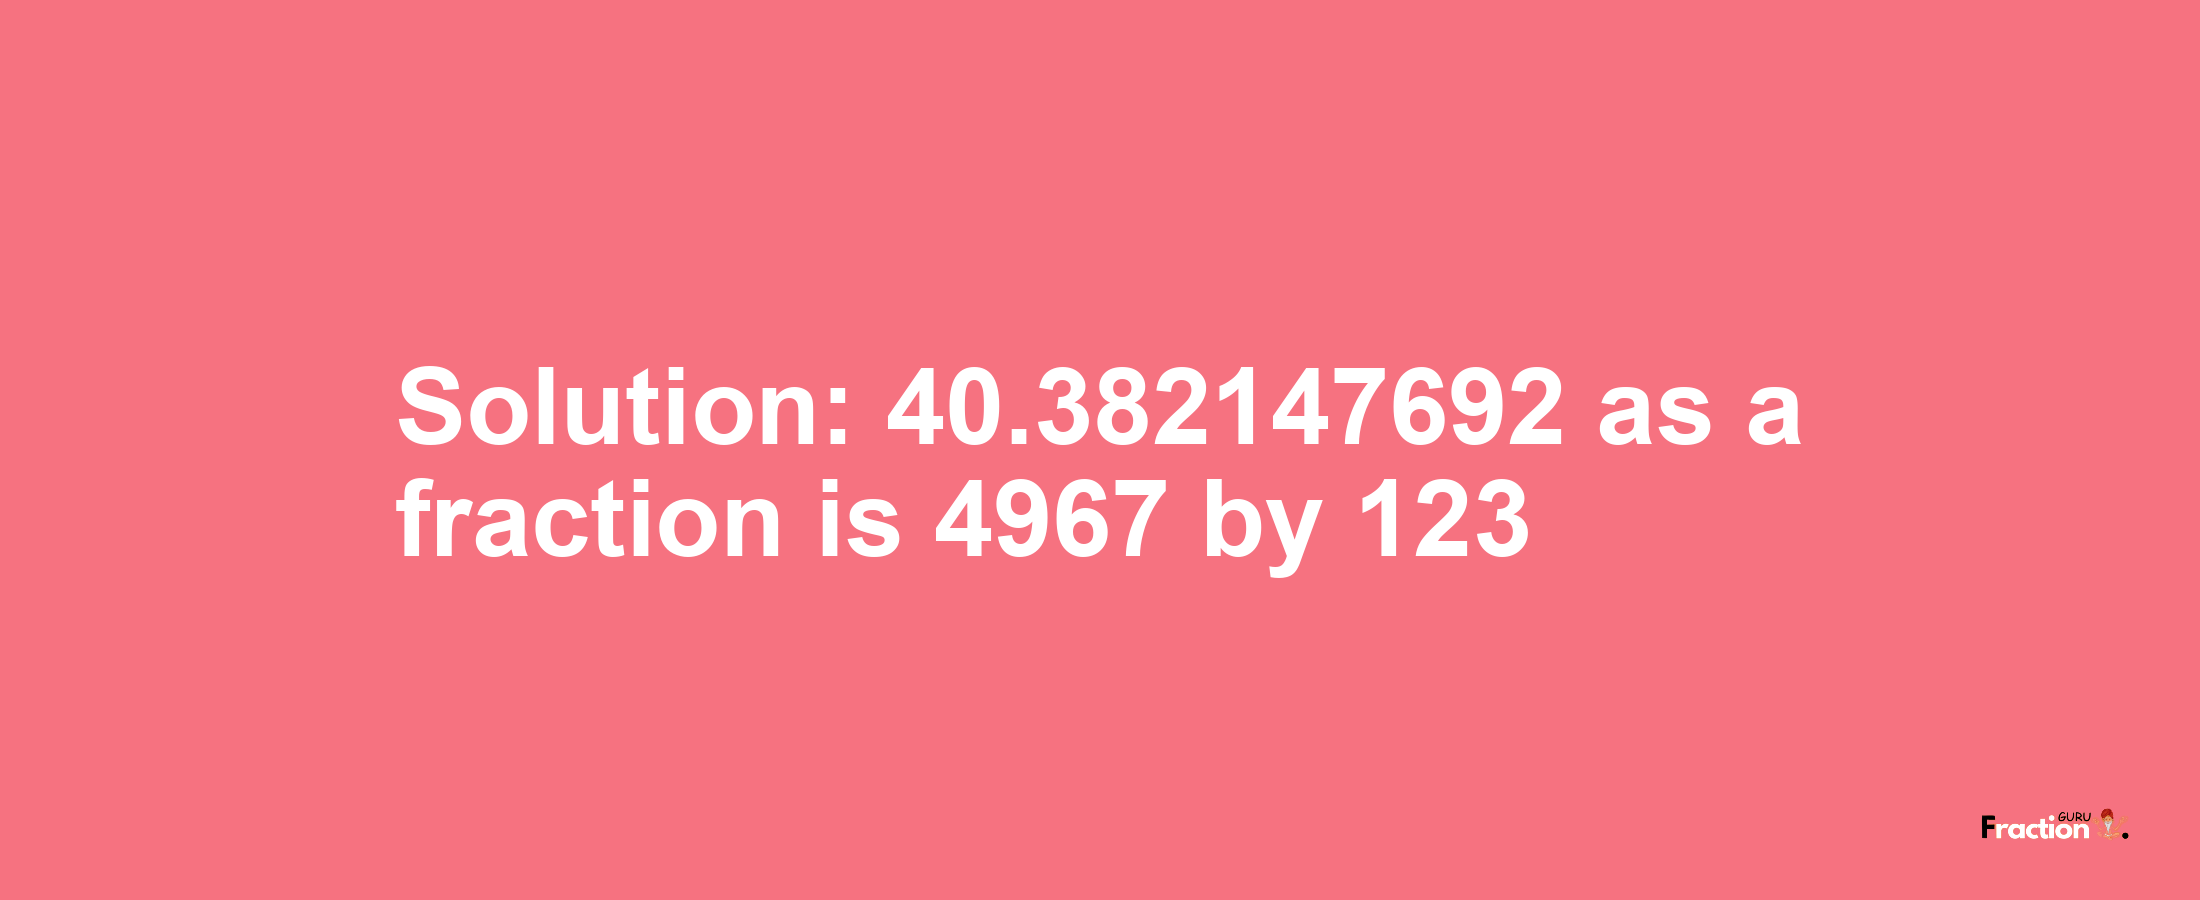 Solution:40.382147692 as a fraction is 4967/123